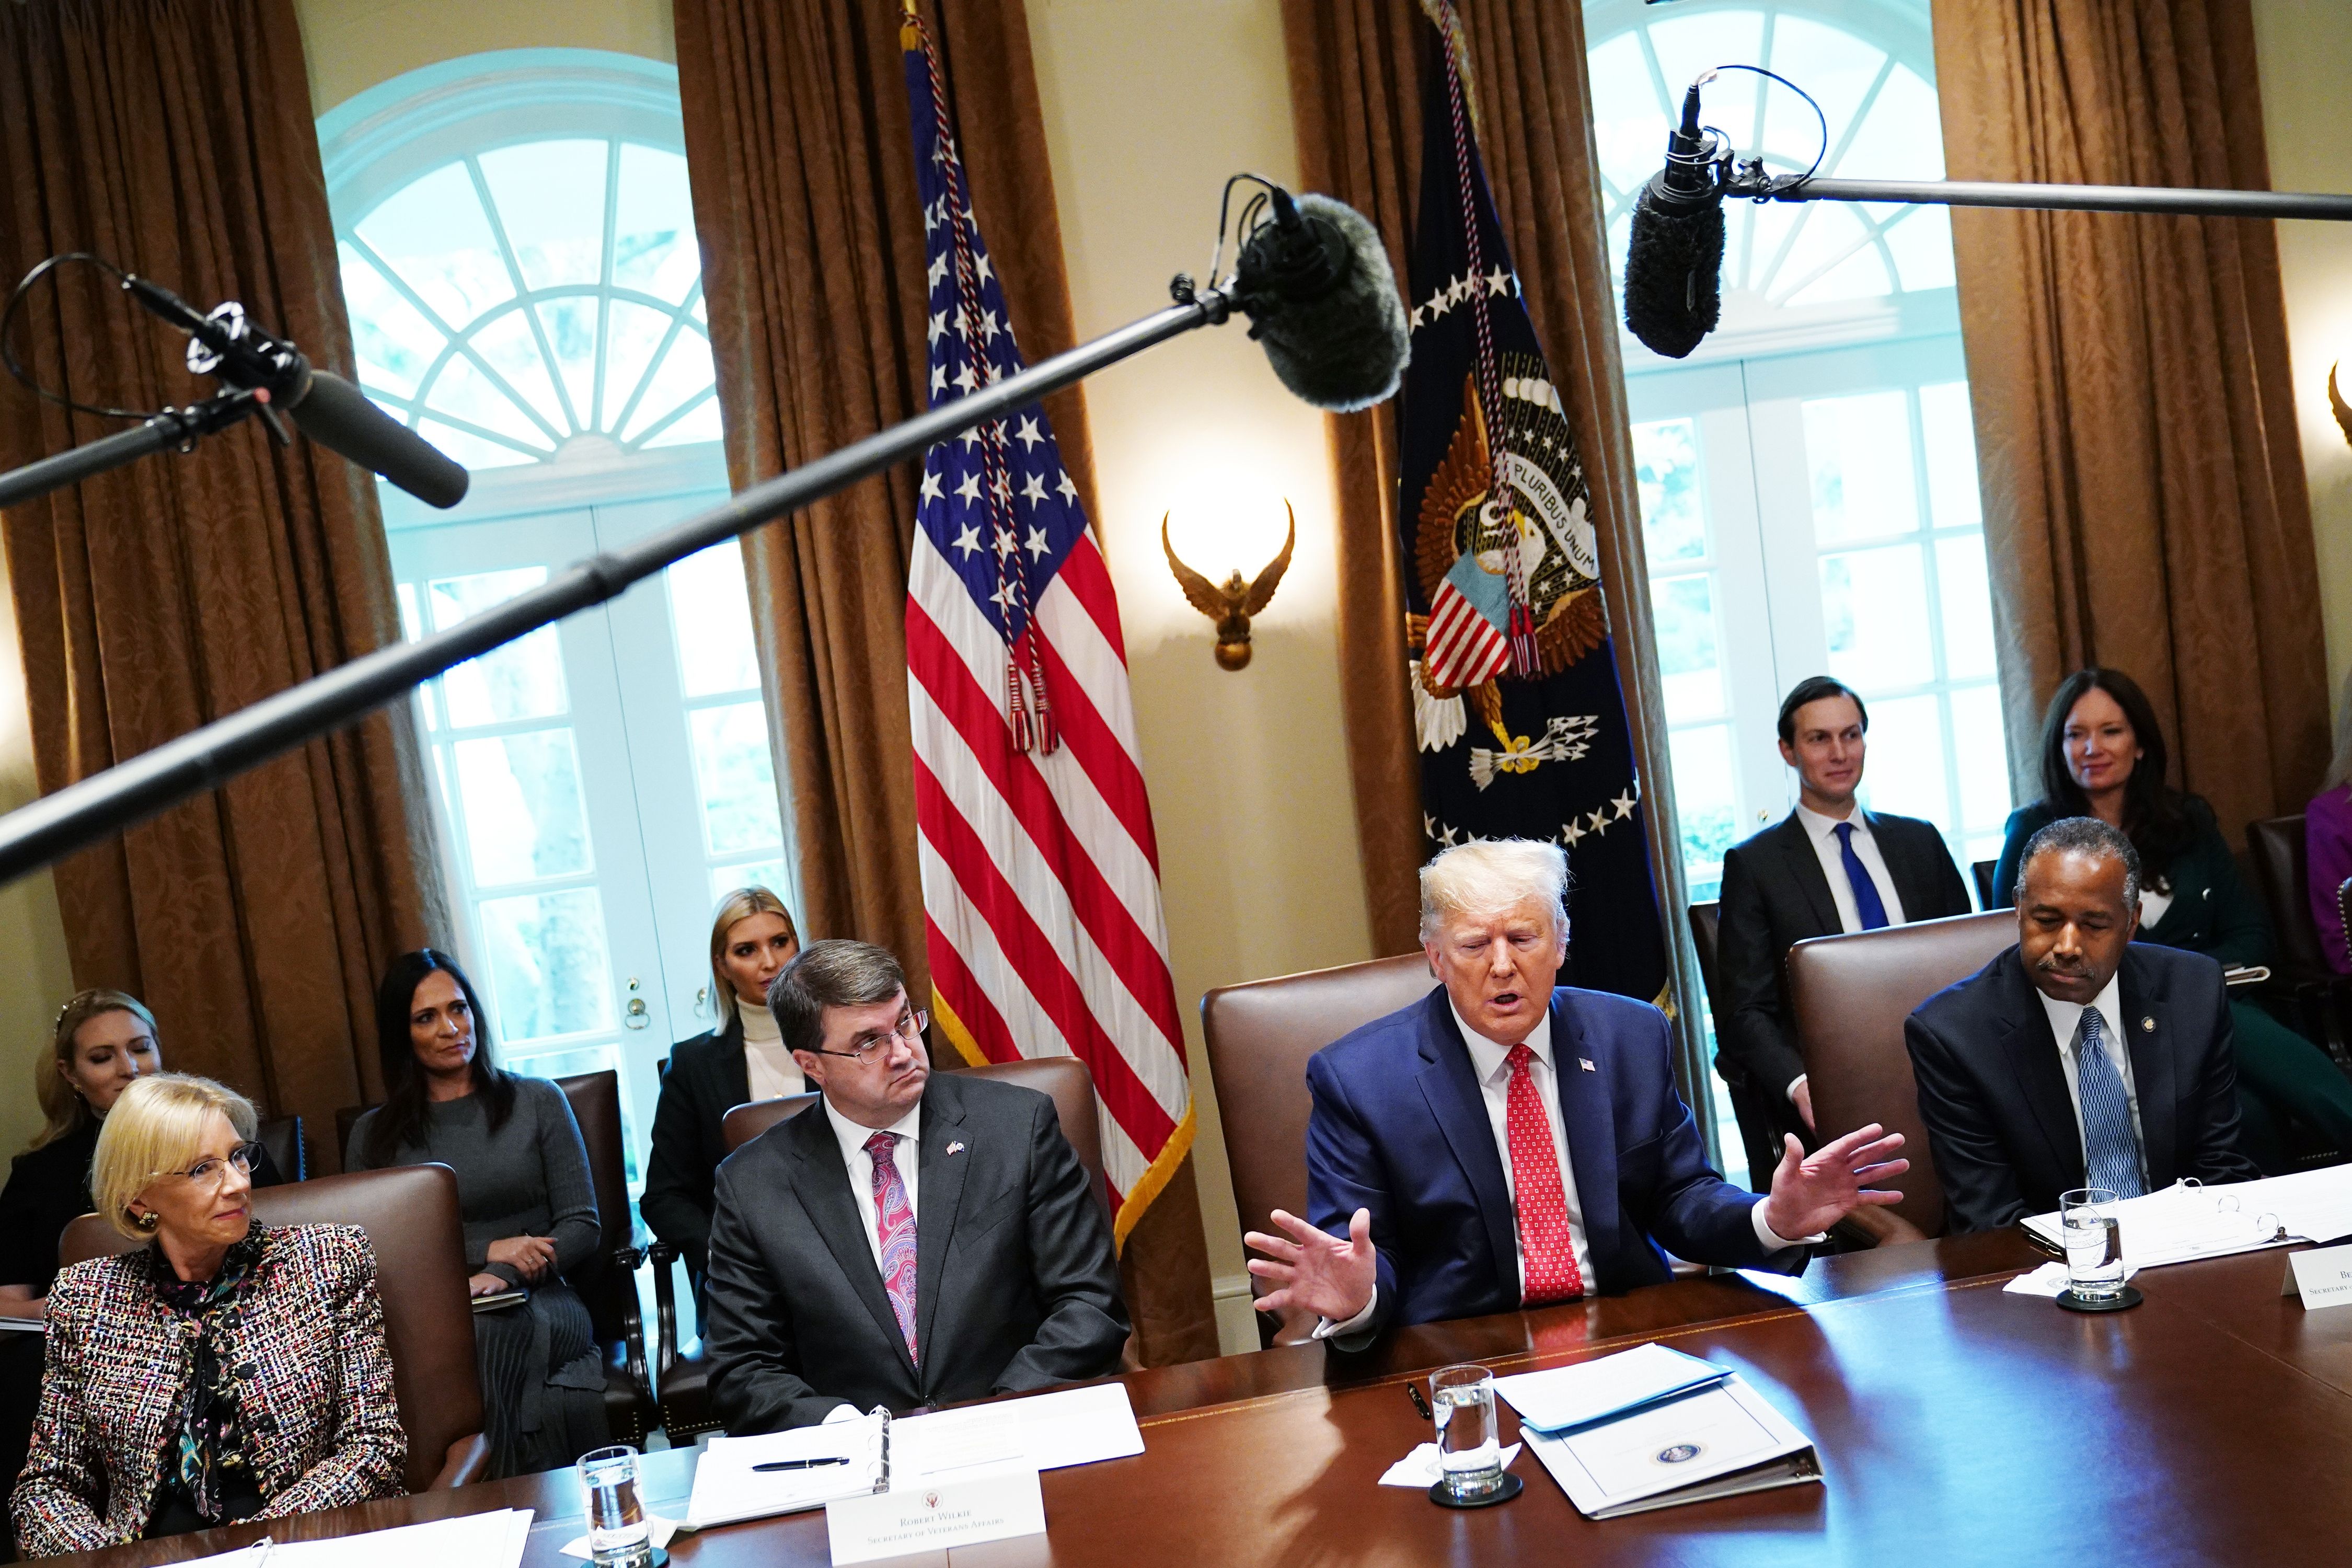 US President Donald Trump speak during a cabinet meeting in the Cabinet Room of the White House in Washington, DC on November 19, 2019, as (L-R) Education Secretary Betsy DeVos, Veterans Affairs Secretary Robert Wilkie, and Secretary of Housing and Urban Development Ben Carson listen. (Photo by MANDEL NGAN/AFP via Getty Images)